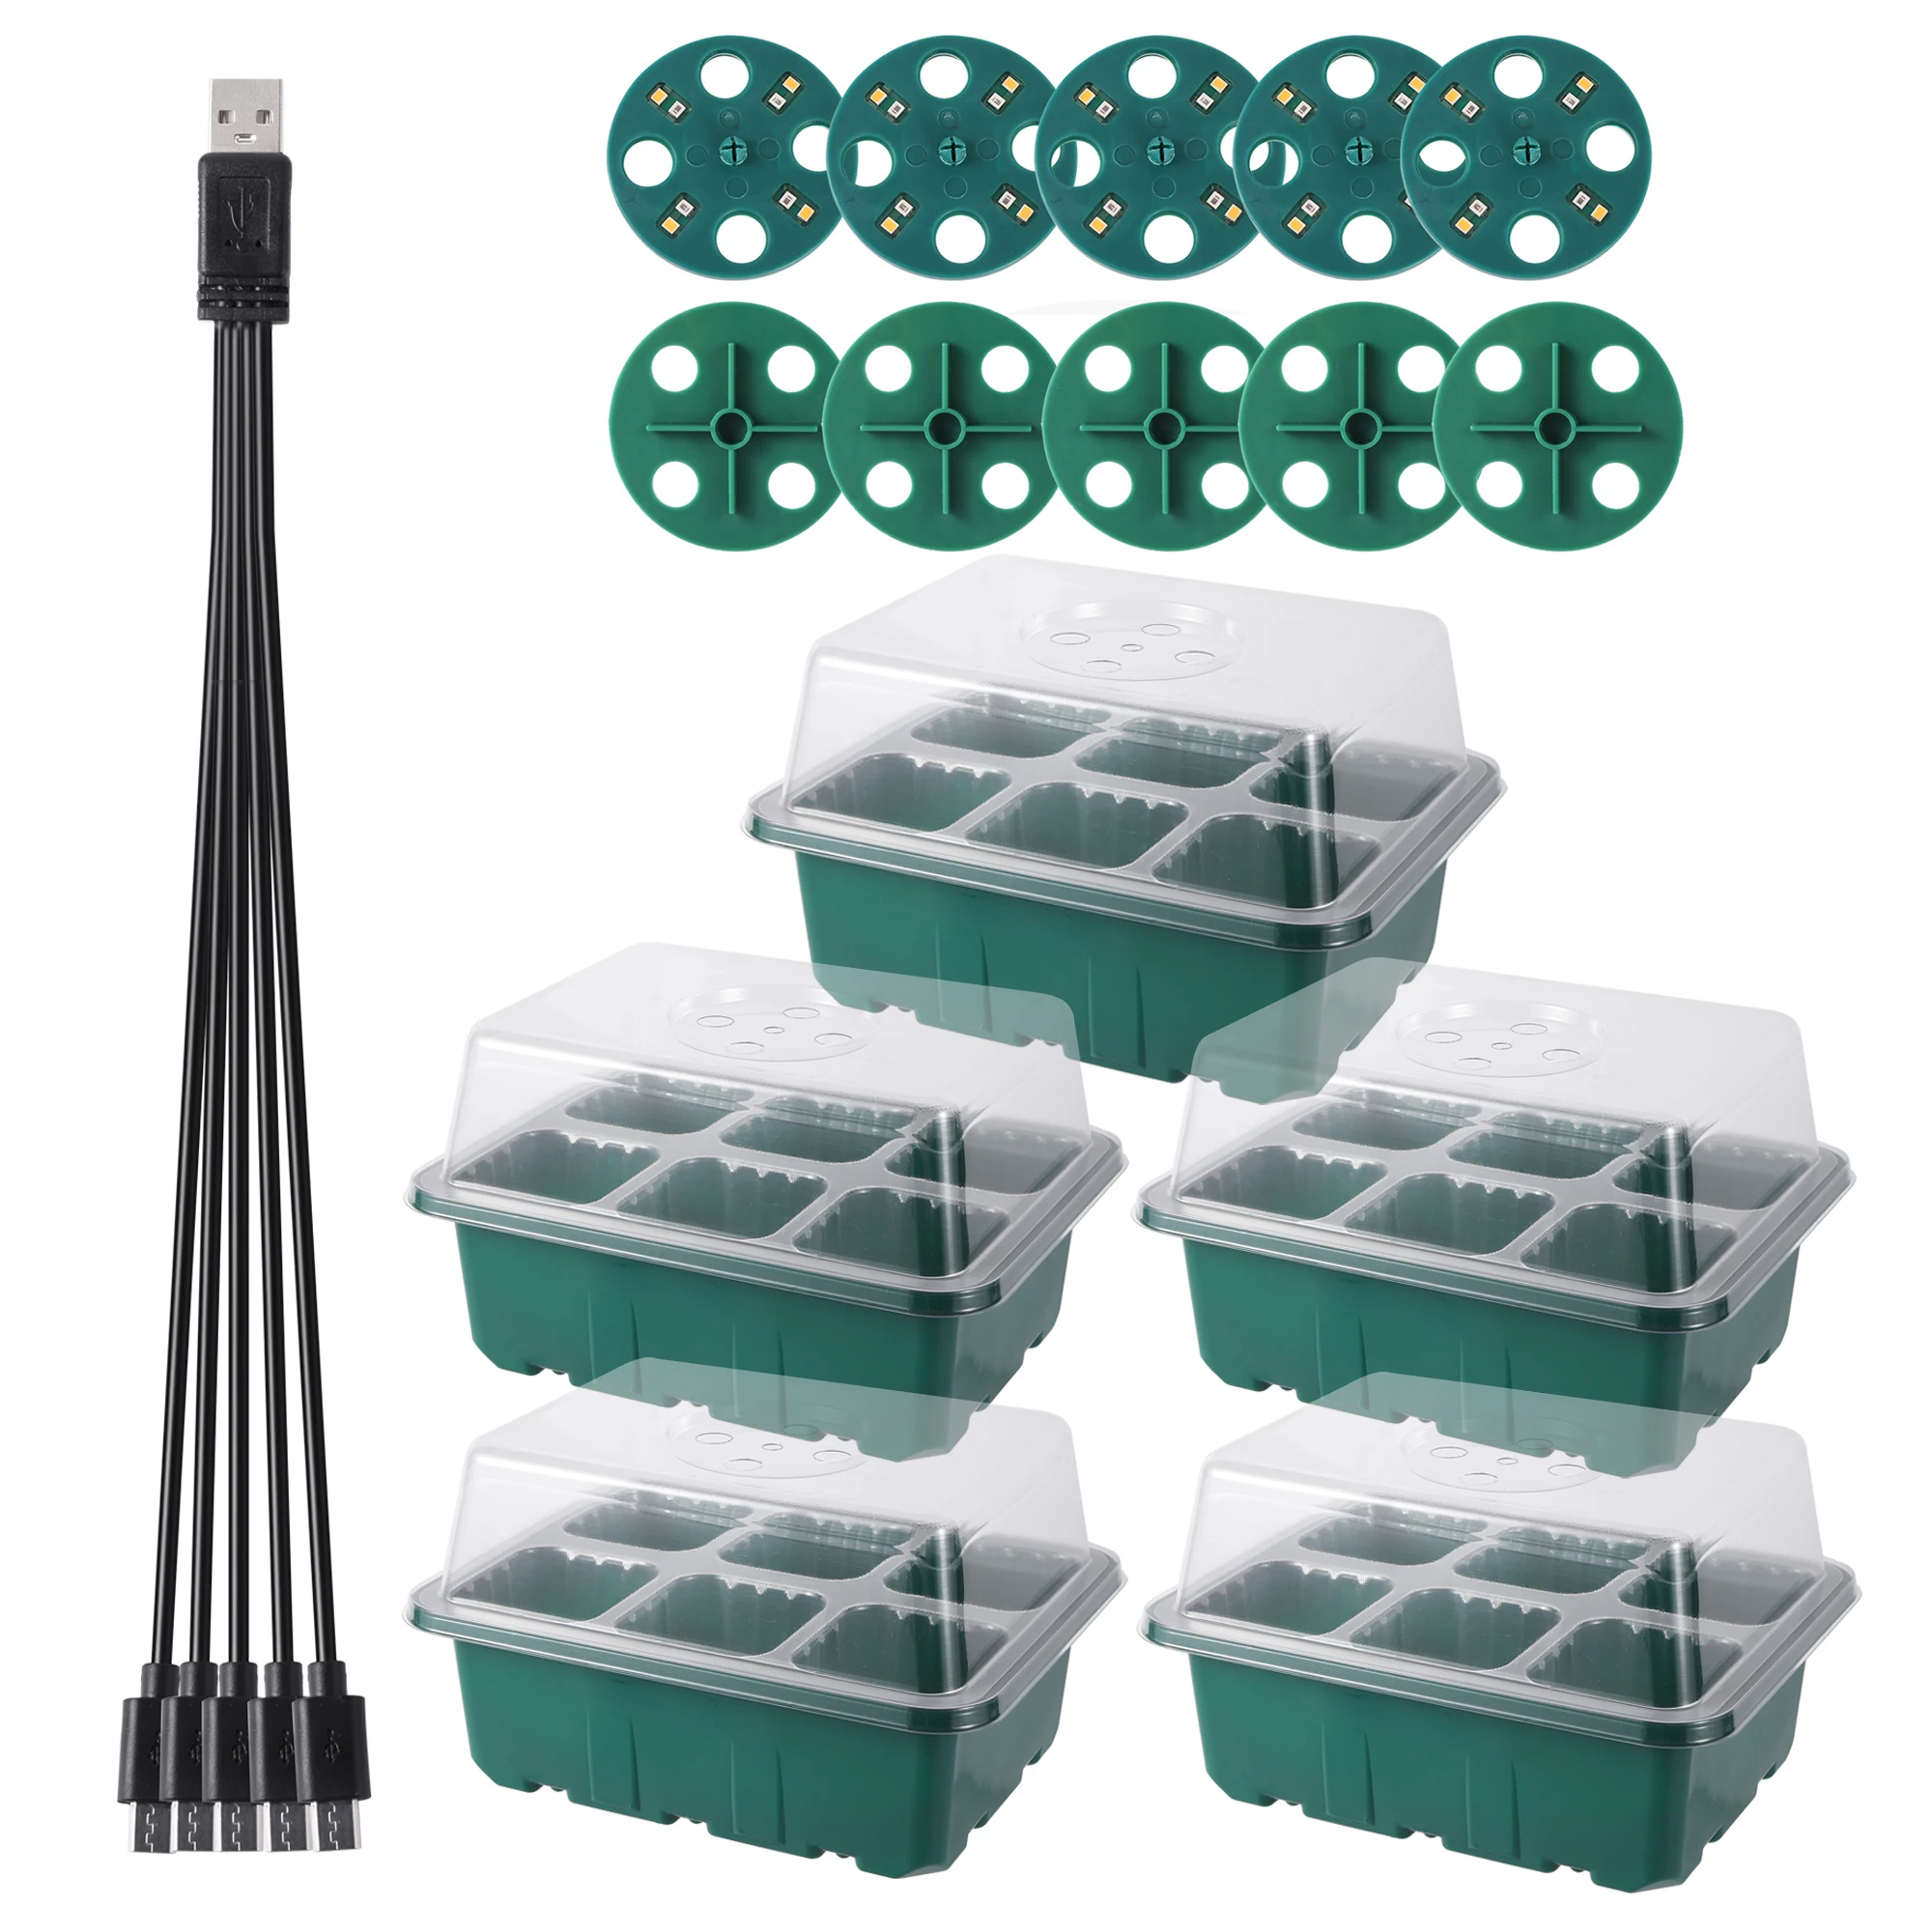 Full Spectrum LED Grow Light 6/12 Cells Seed Starter Kit Plant Seeds Grow Box Seedling Trays Germination Box with Dome And Base